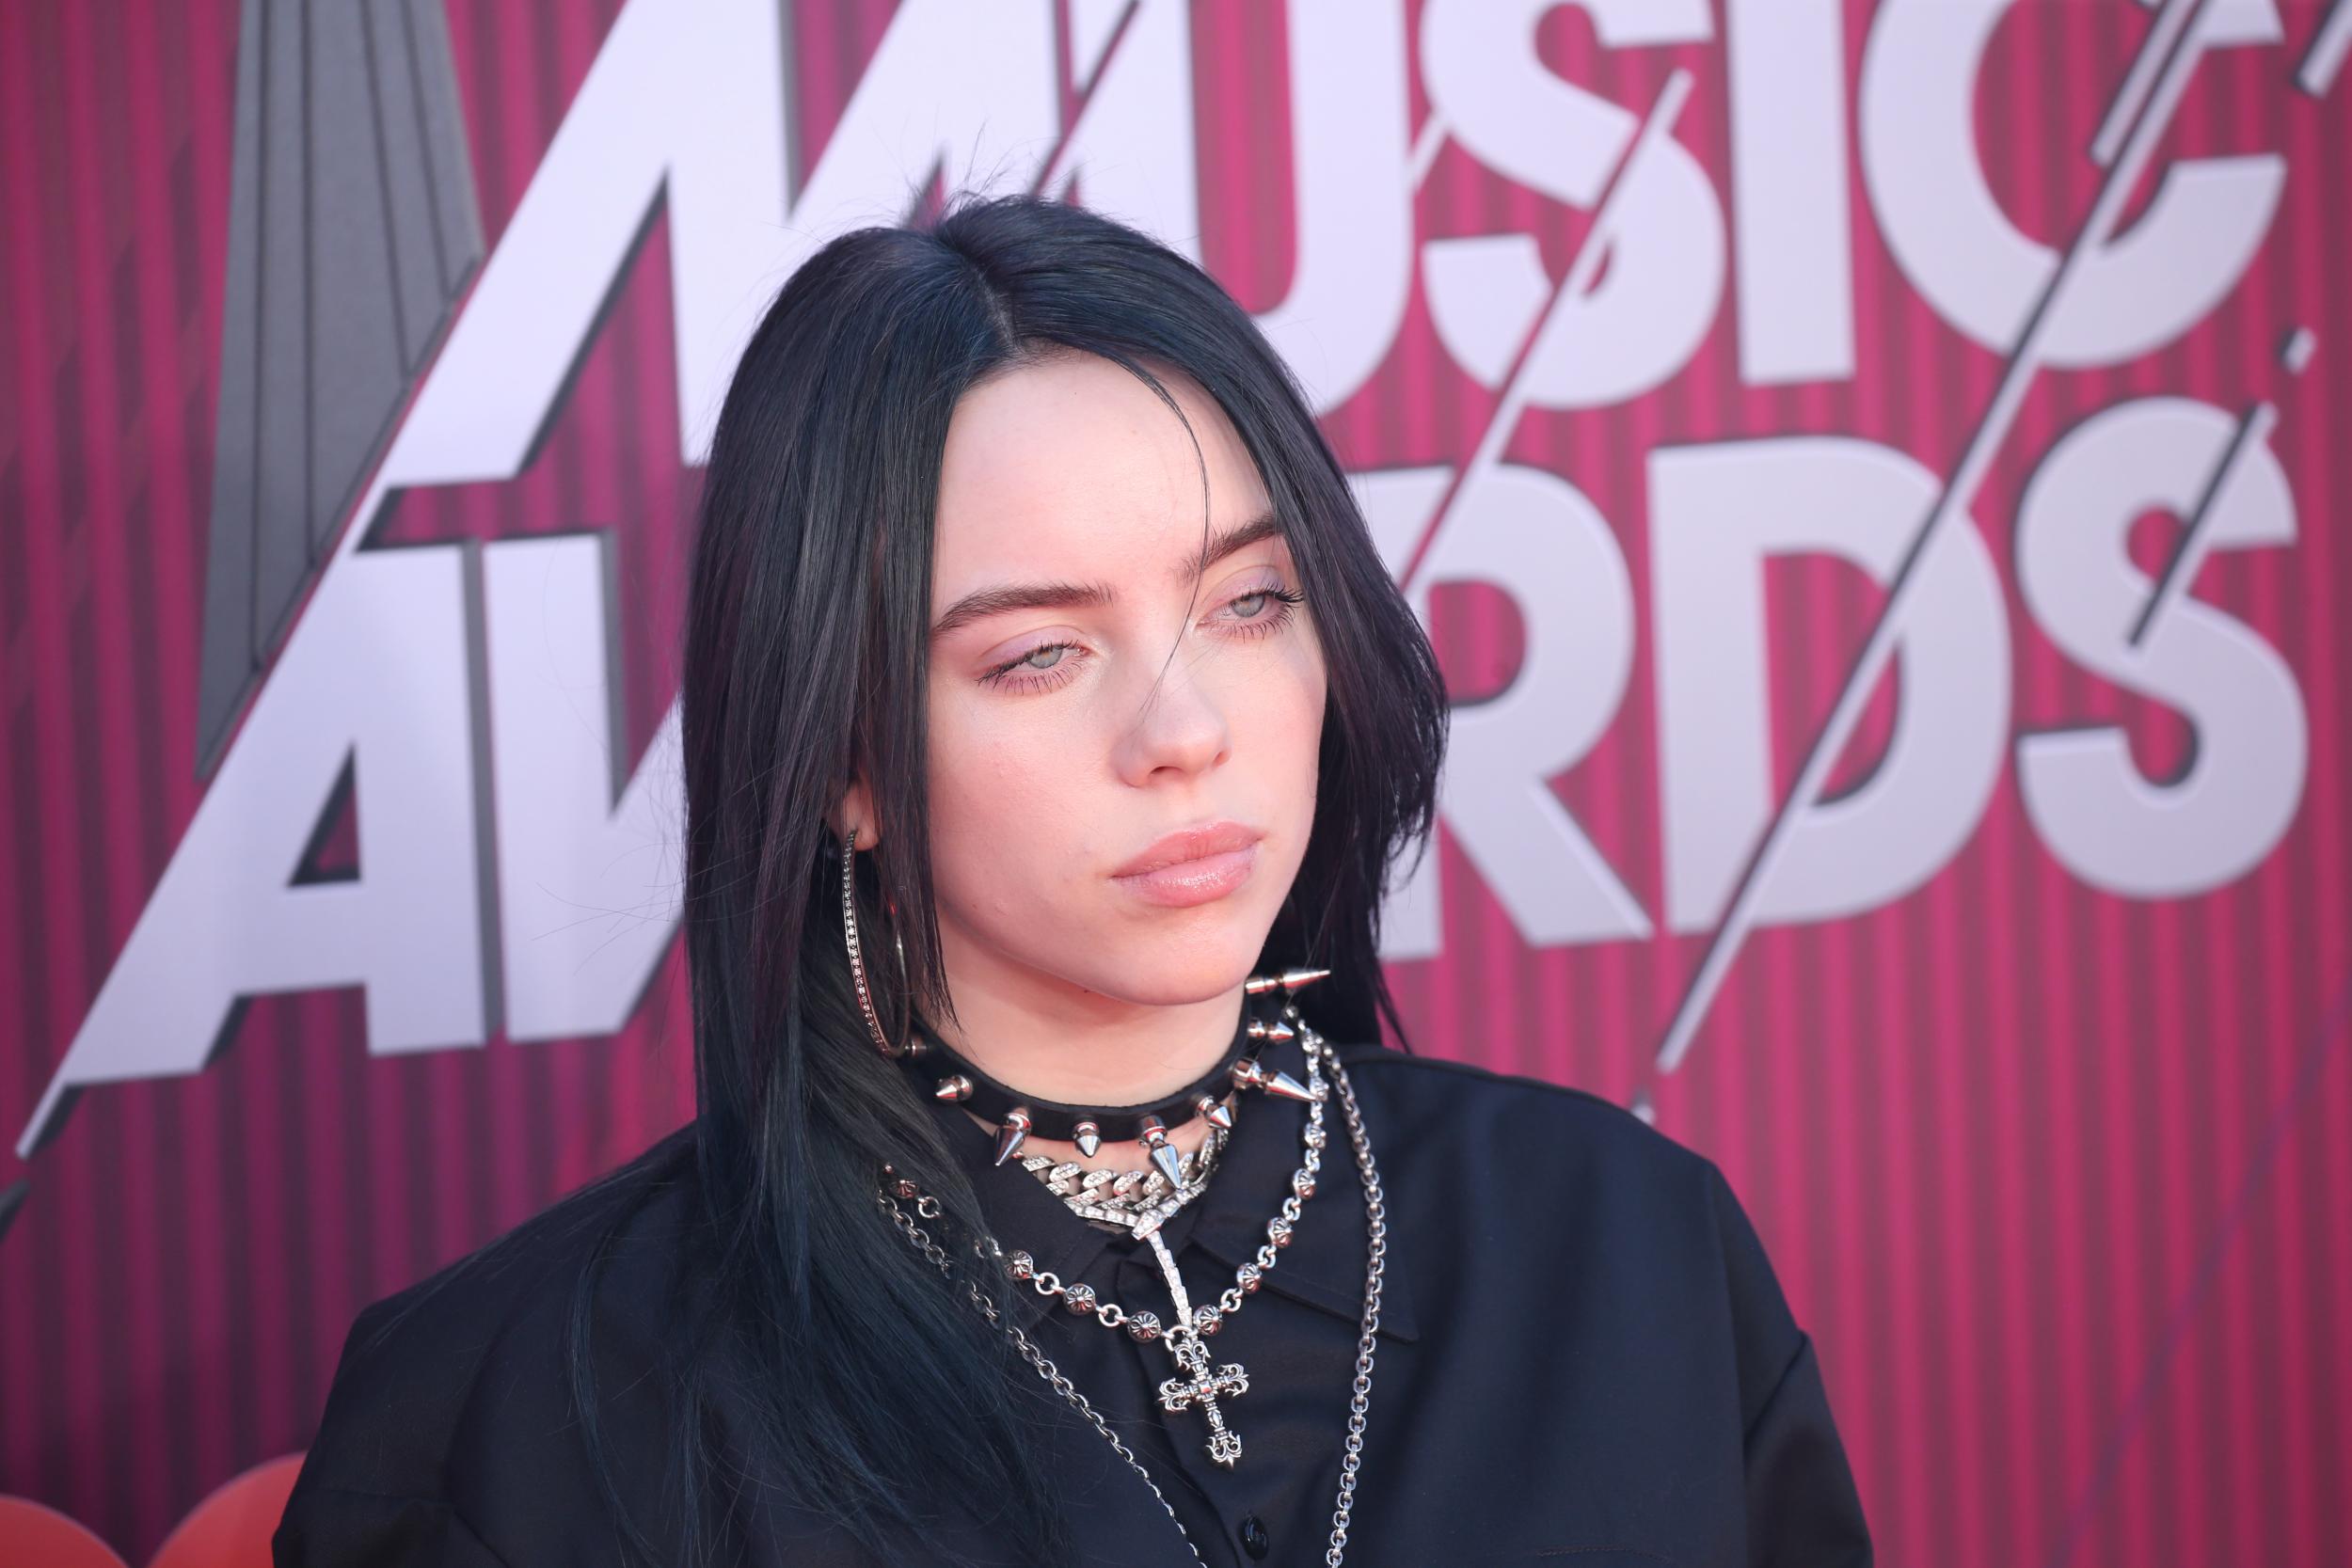 Jenny Schoolgirl Porn - Billie Eilish interview: 'I want to be able to mourn for ...